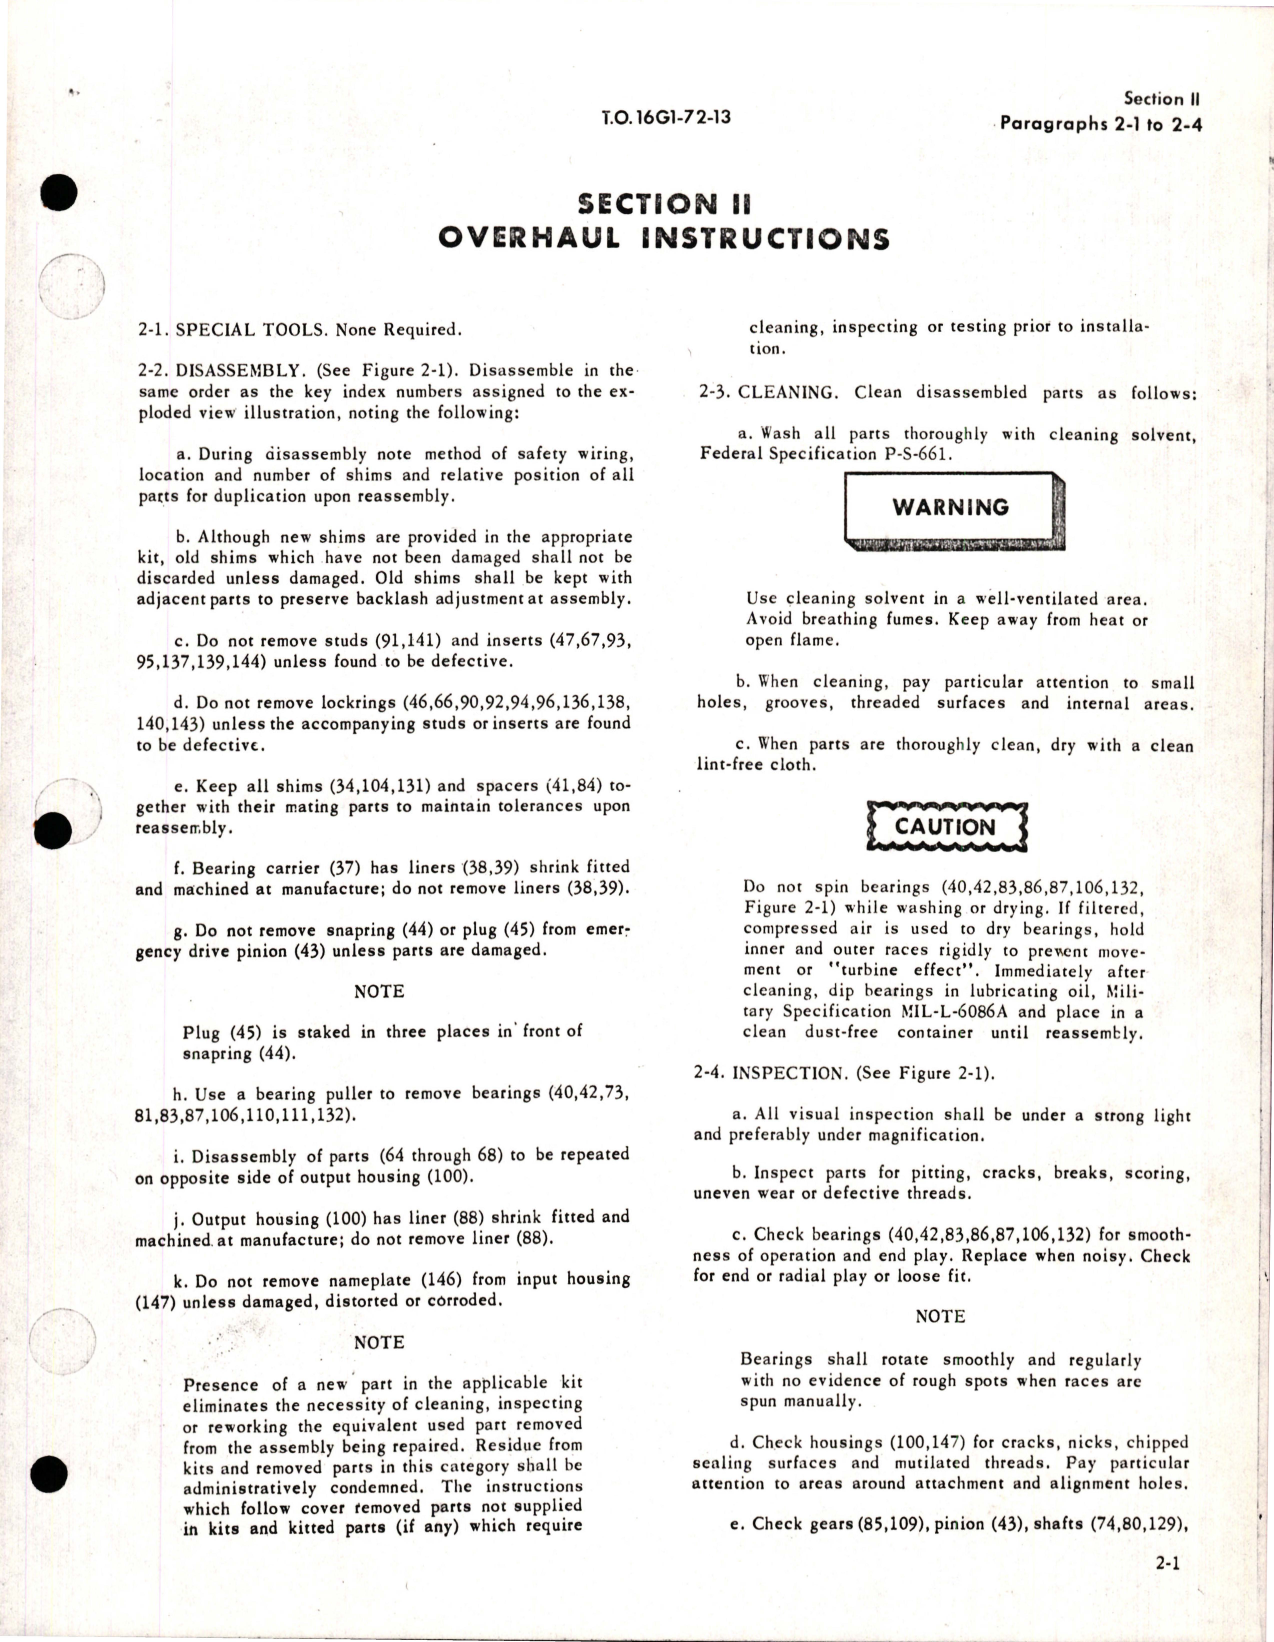 Sample page 5 from AirCorps Library document: Overhaul Instructions for Manual Gear Box Assembly, Main Landing Gear, Extension and Retraction Mechanism